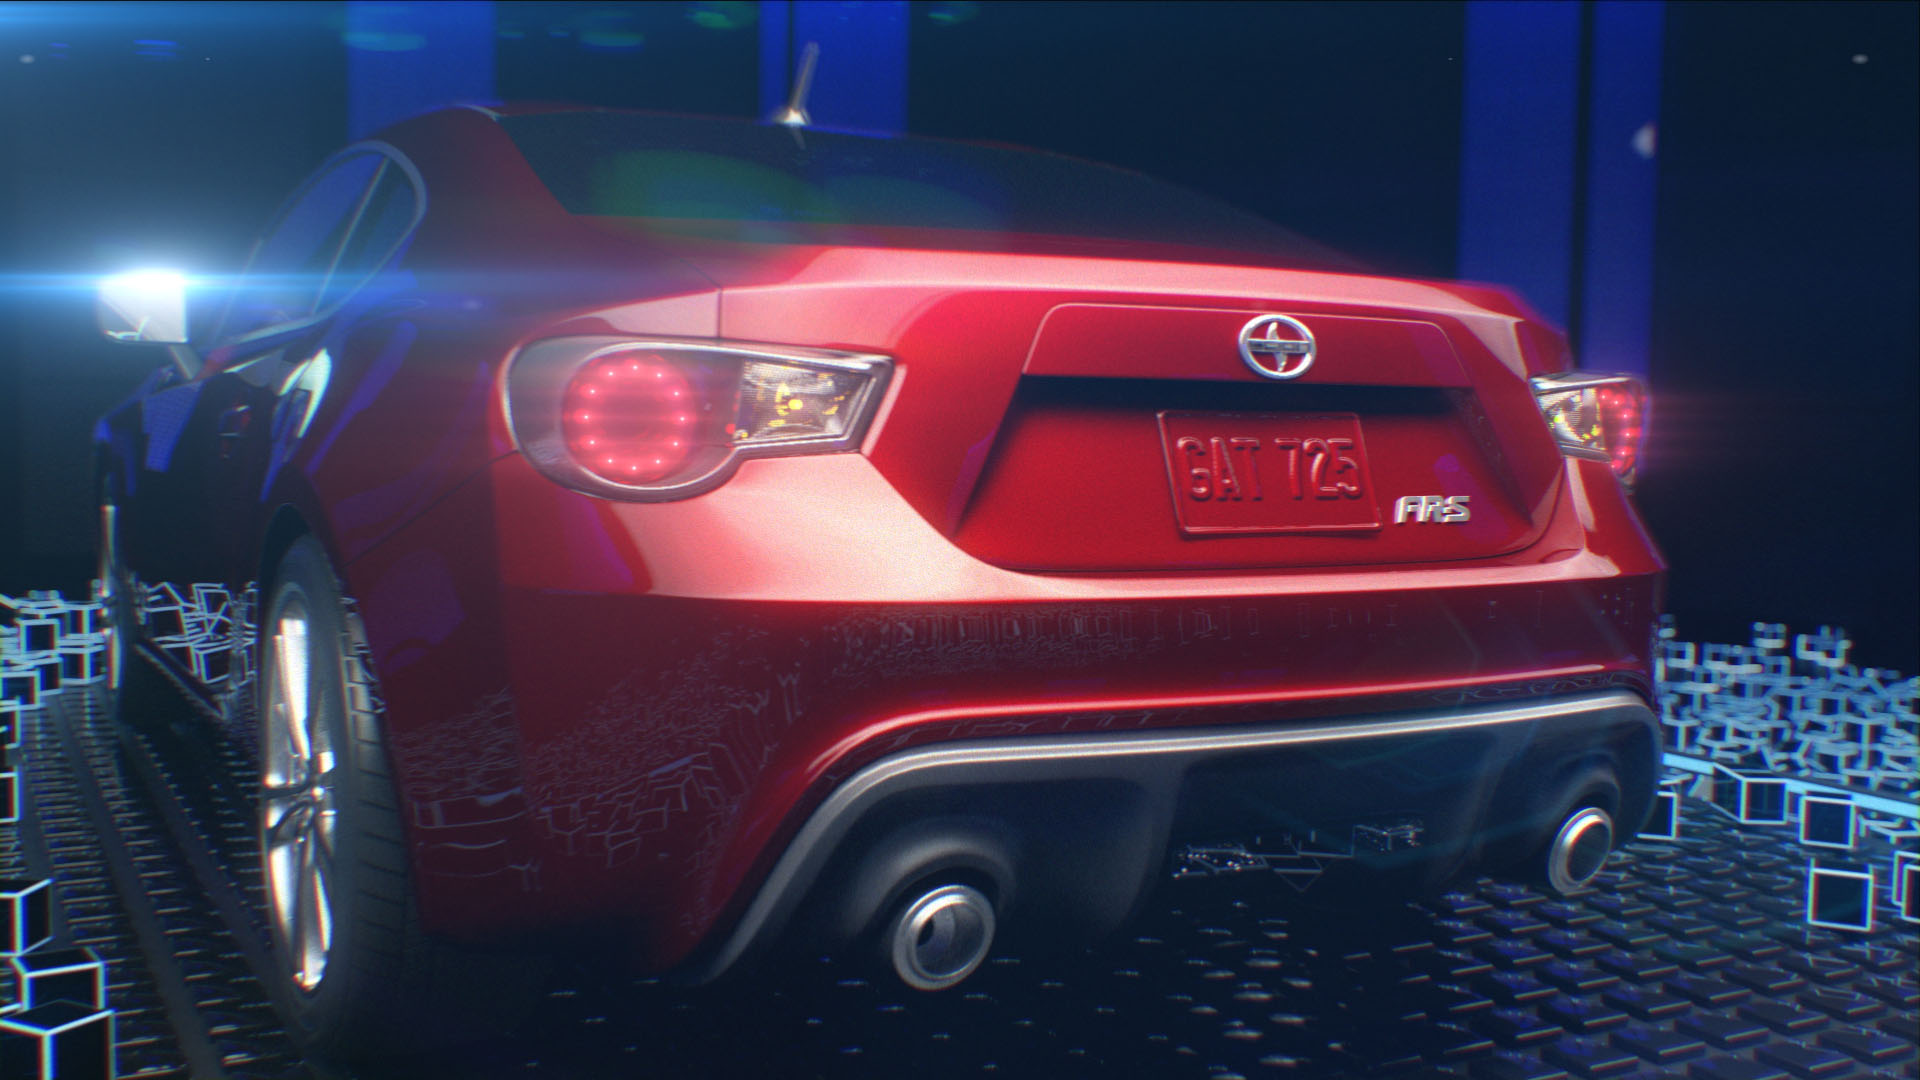 Marcus creates new spot for Scion FRS